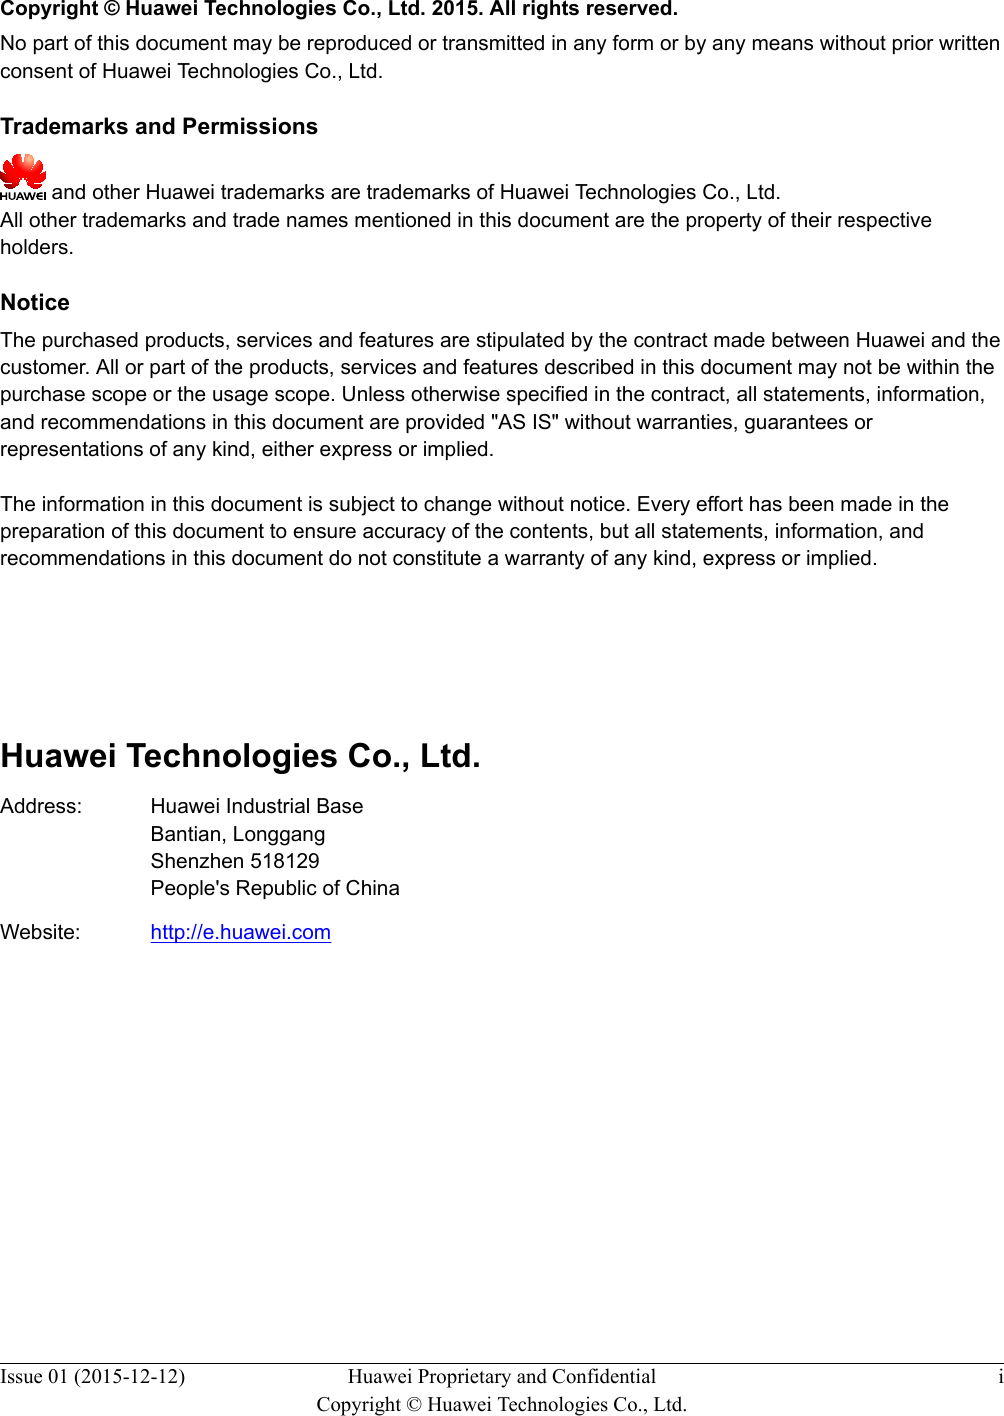   Copyright © Huawei Technologies Co., Ltd. 2015. All rights reserved.No part of this document may be reproduced or transmitted in any form or by any means without prior writtenconsent of Huawei Technologies Co., Ltd. Trademarks and Permissions and other Huawei trademarks are trademarks of Huawei Technologies Co., Ltd.All other trademarks and trade names mentioned in this document are the property of their respectiveholders. NoticeThe purchased products, services and features are stipulated by the contract made between Huawei and thecustomer. All or part of the products, services and features described in this document may not be within thepurchase scope or the usage scope. Unless otherwise specified in the contract, all statements, information,and recommendations in this document are provided &quot;AS IS&quot; without warranties, guarantees orrepresentations of any kind, either express or implied.The information in this document is subject to change without notice. Every effort has been made in thepreparation of this document to ensure accuracy of the contents, but all statements, information, andrecommendations in this document do not constitute a warranty of any kind, express or implied.        Huawei Technologies Co., Ltd.Address: Huawei Industrial BaseBantian, LonggangShenzhen 518129People&apos;s Republic of ChinaWebsite: http://e.huawei.comIssue 01 (2015-12-12) Huawei Proprietary and ConfidentialCopyright © Huawei Technologies Co., Ltd.i